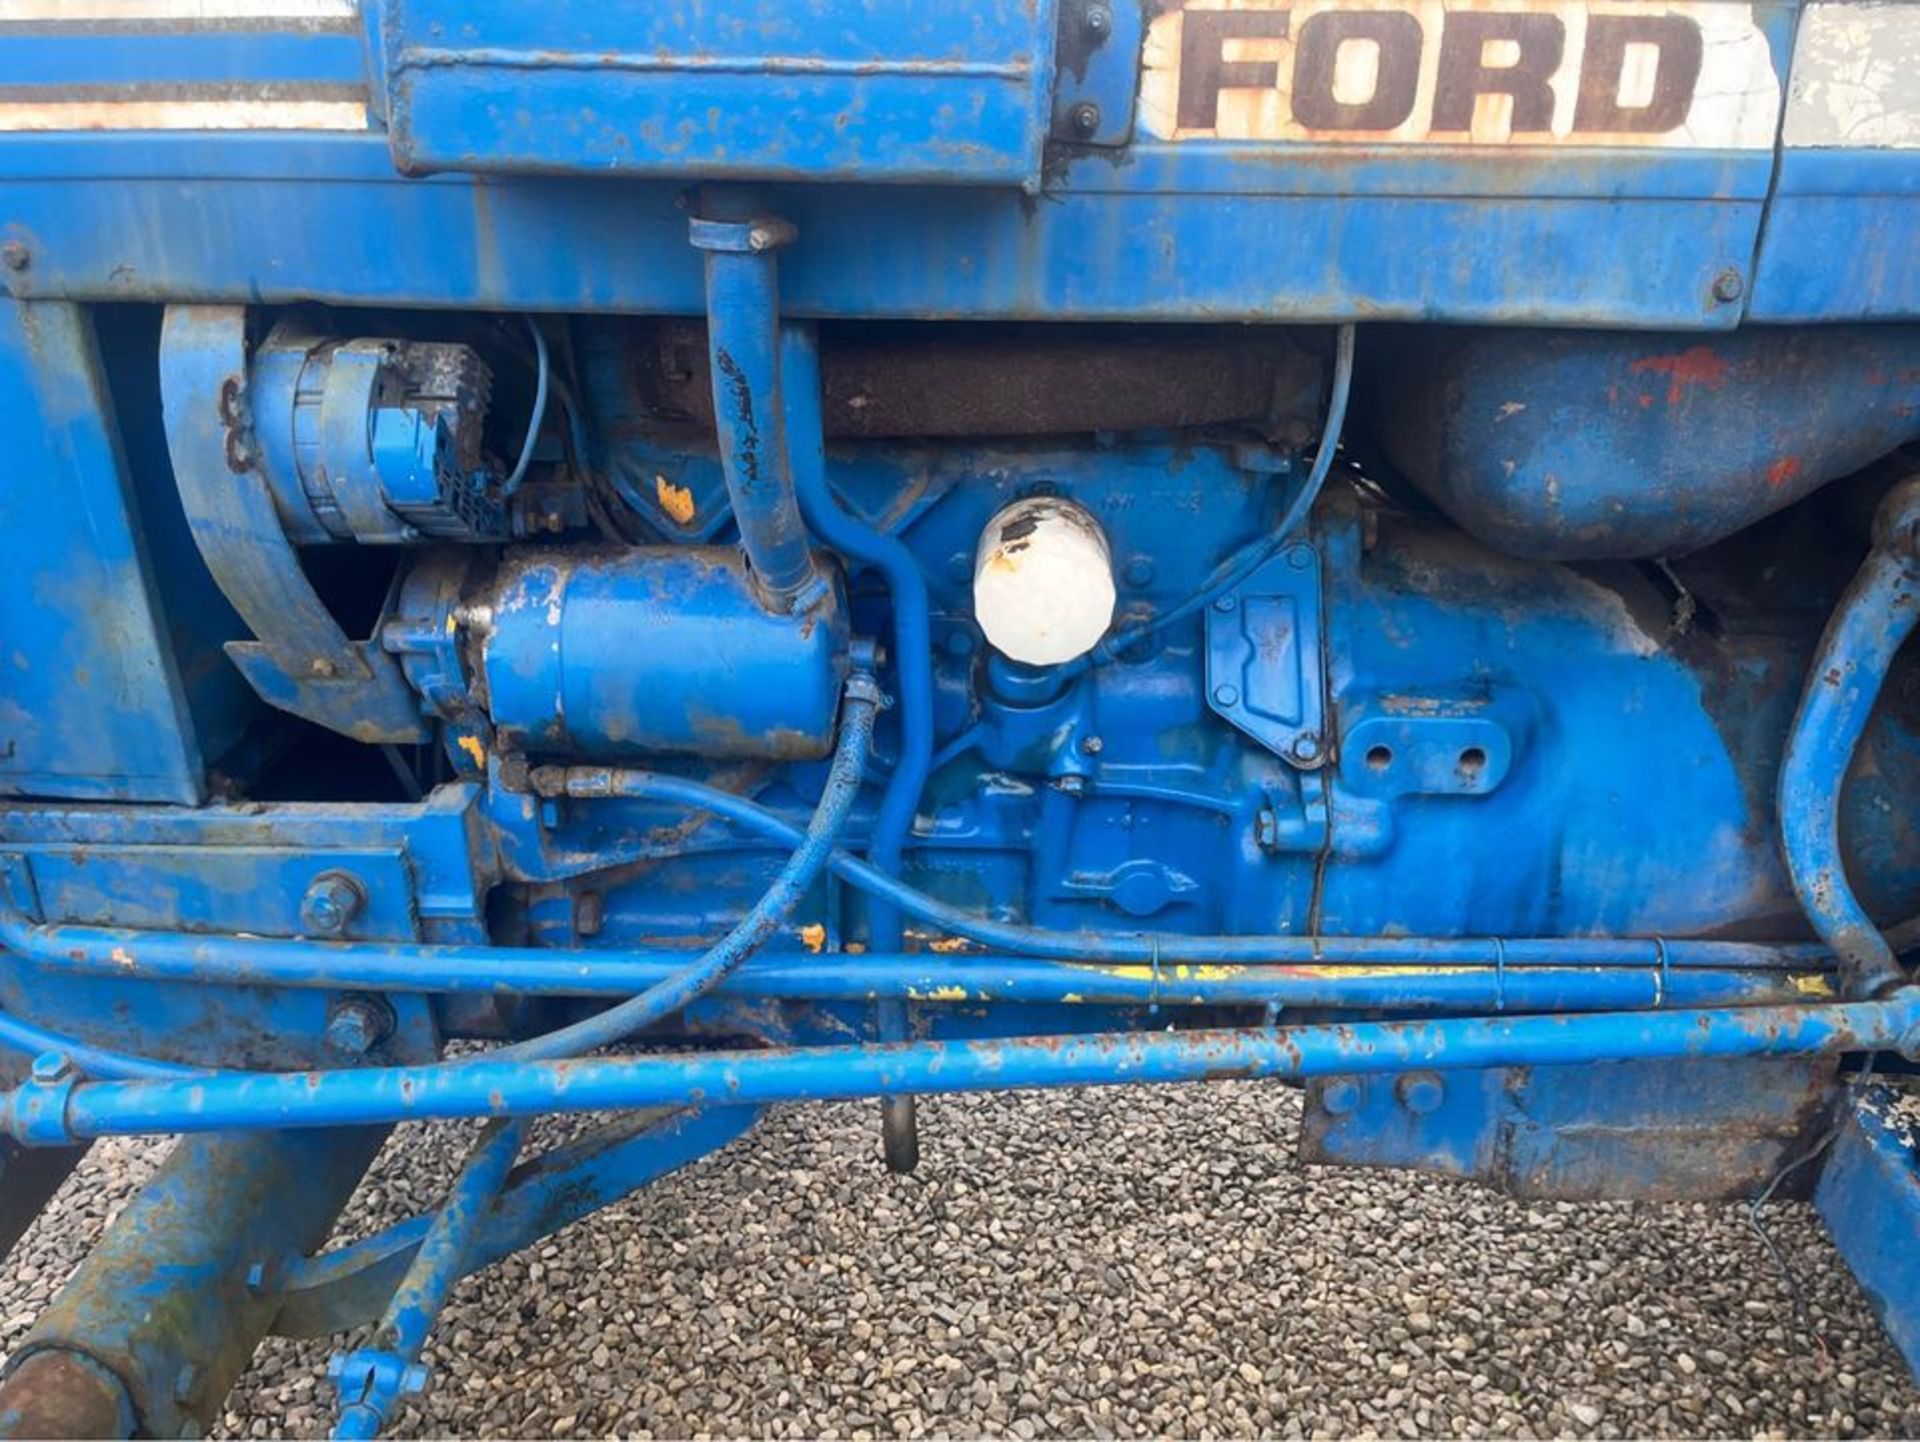 1980, FORD 6600 Tractor (2WD) - Image 20 of 20